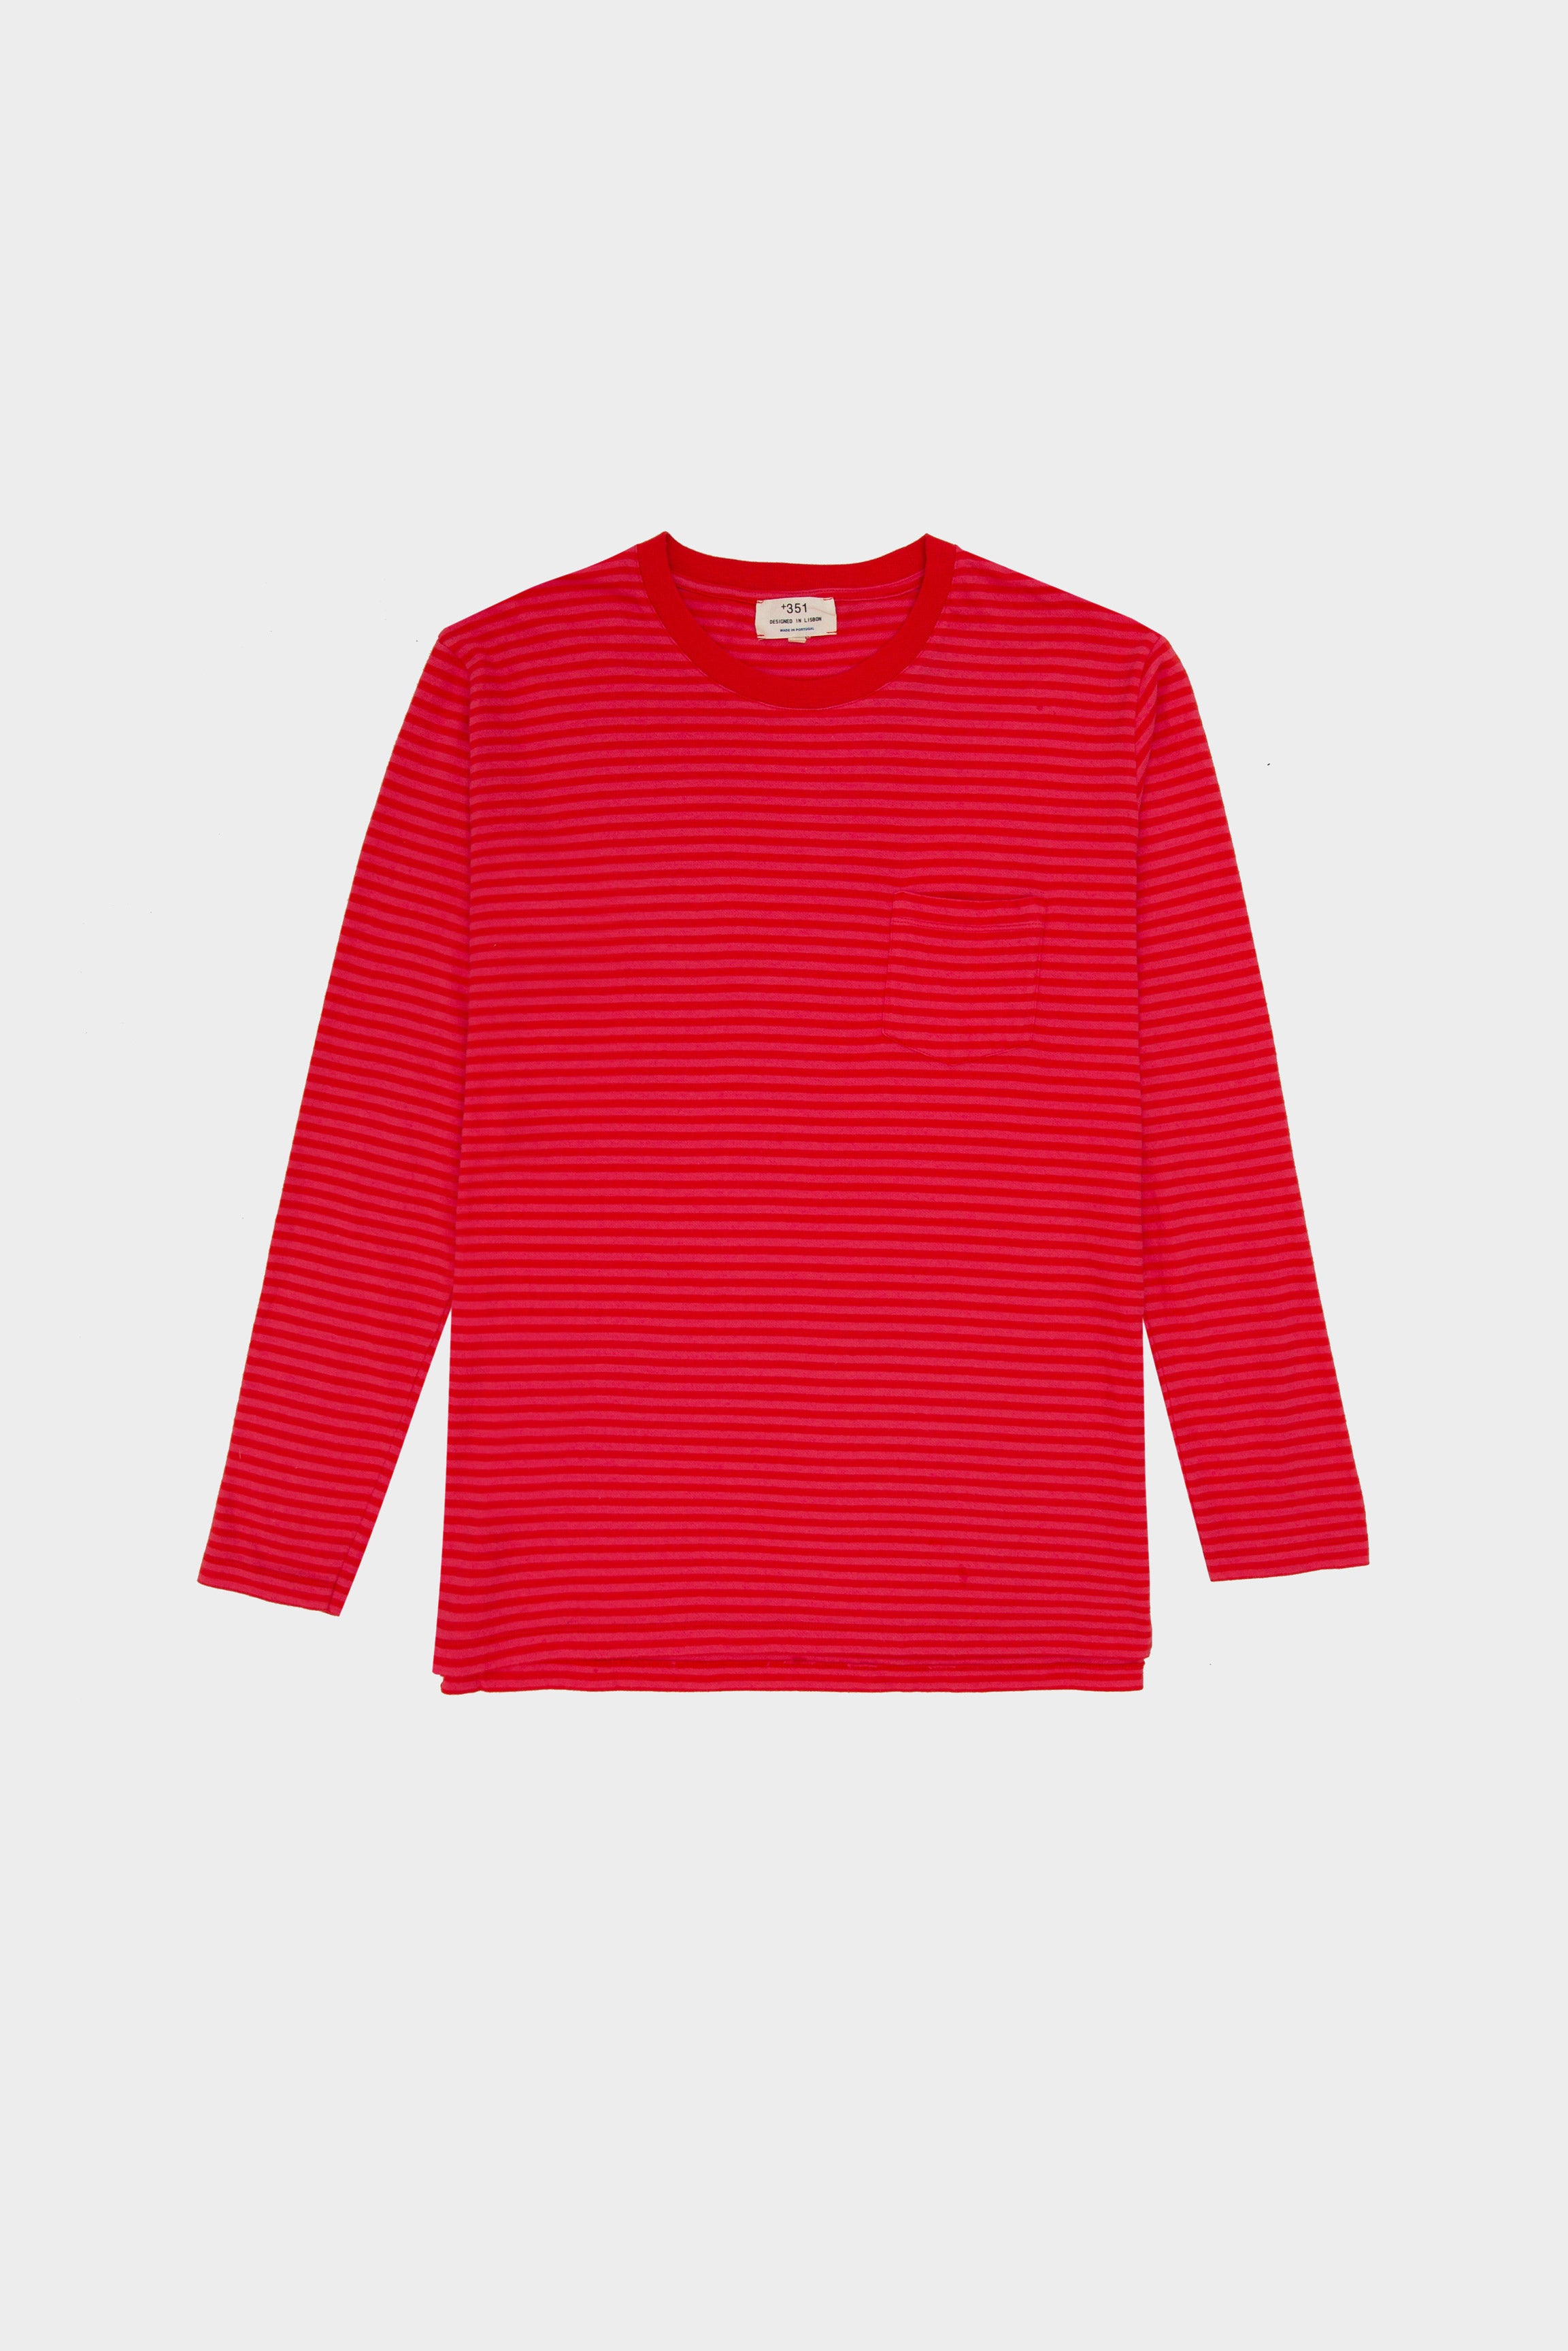 LONG SLEEVE STRIPES RED & ROSE